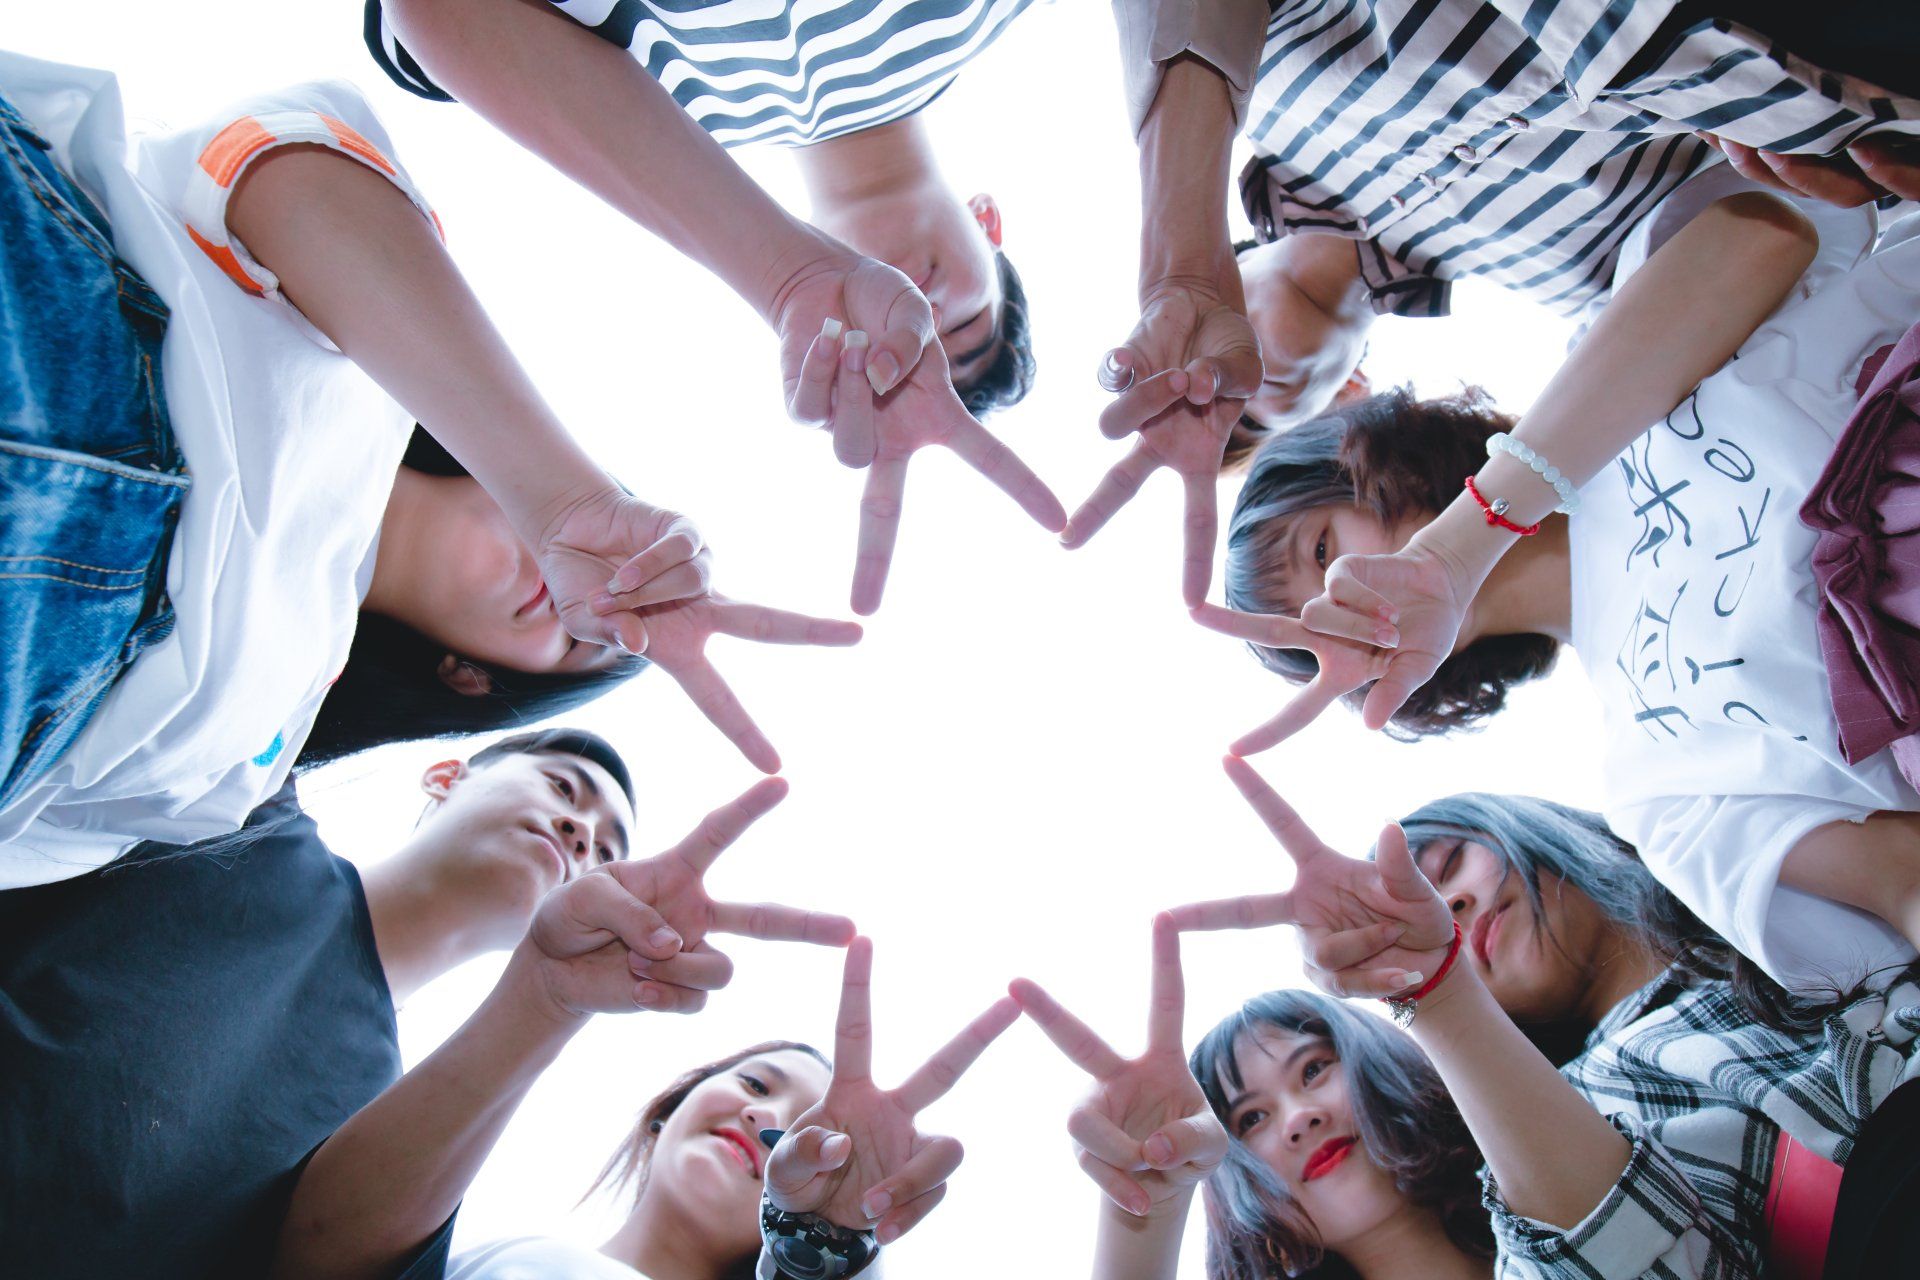 A group of people are making a star with their hands in a circle.